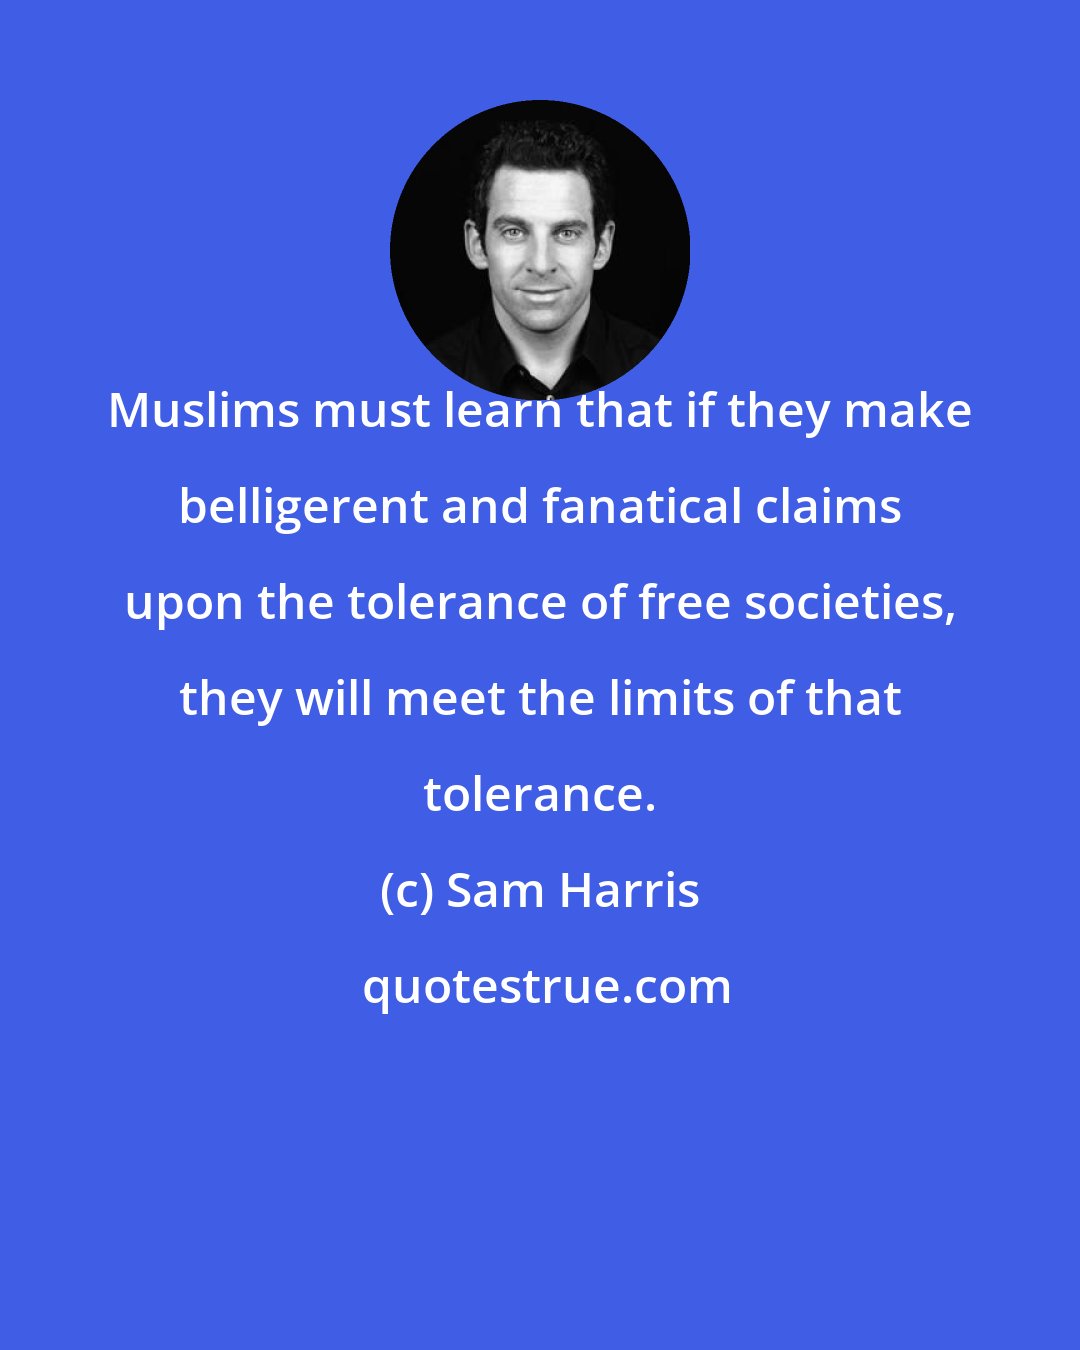 Sam Harris: Muslims must learn that if they make belligerent and fanatical claims upon the tolerance of free societies, they will meet the limits of that tolerance.